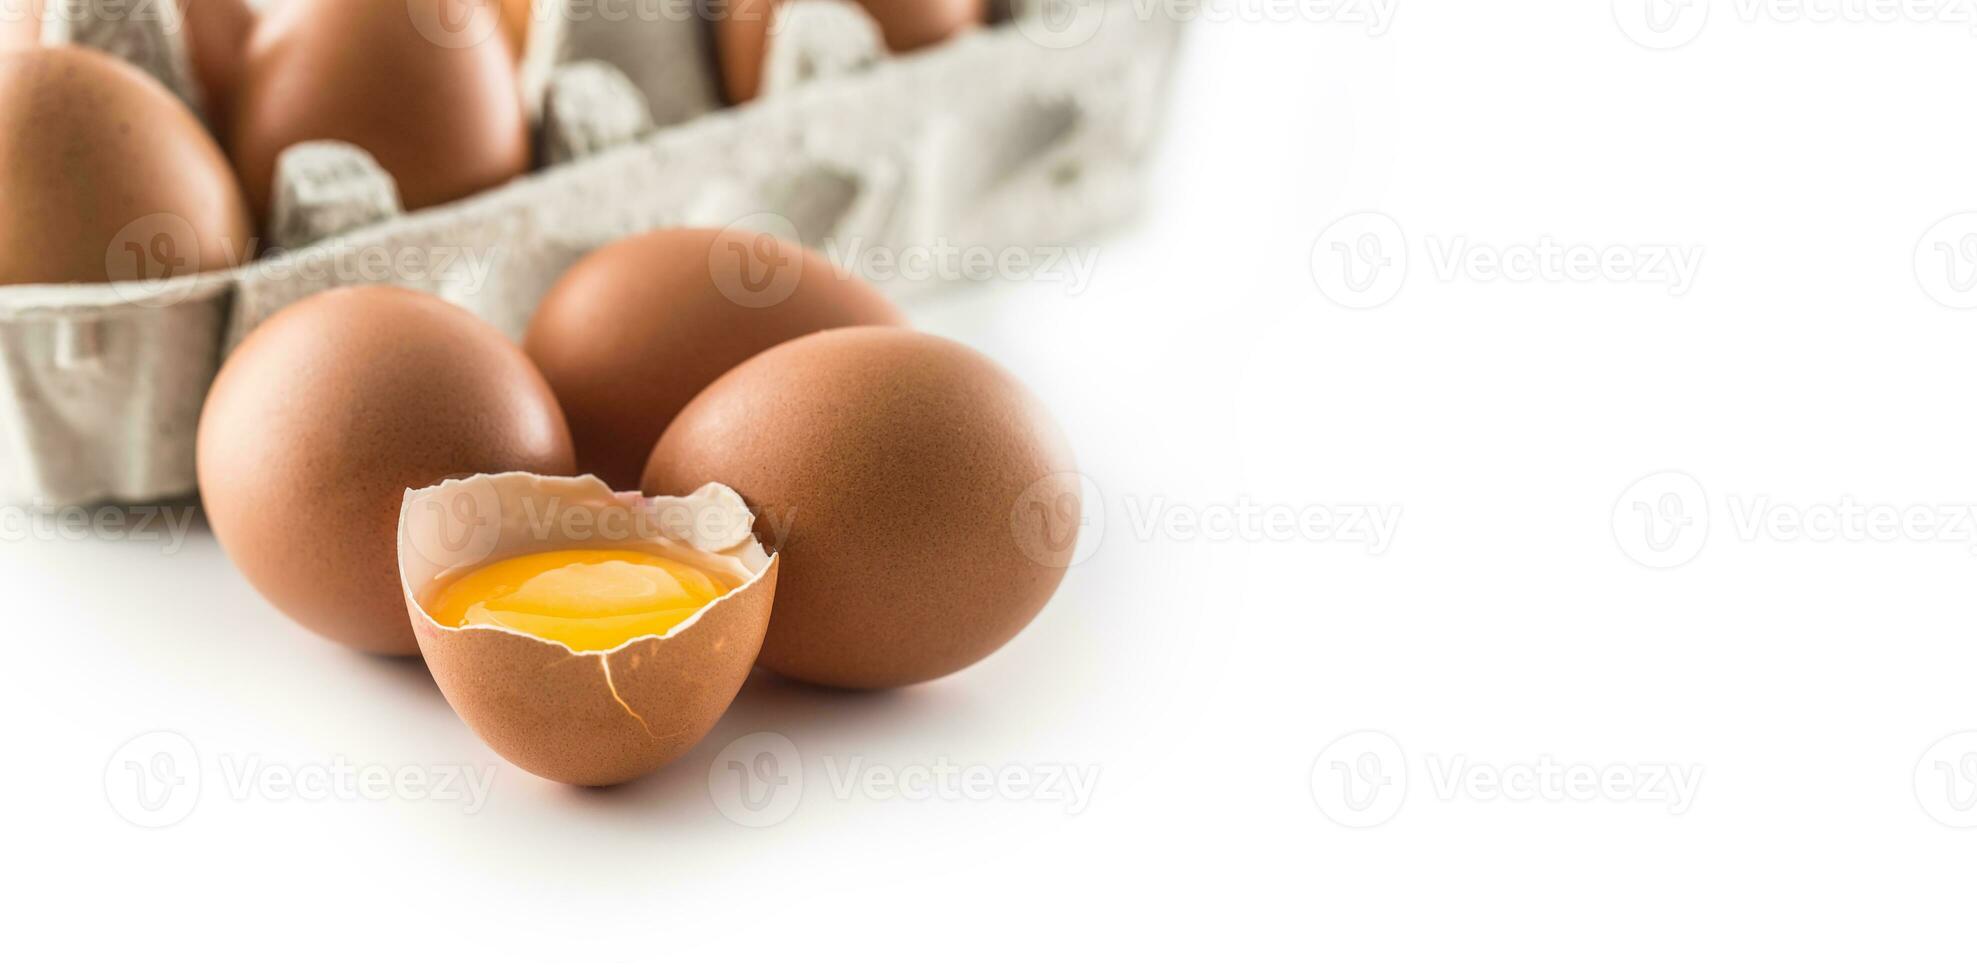 Chicken eggs and broken egg with yolk isolated on white background photo